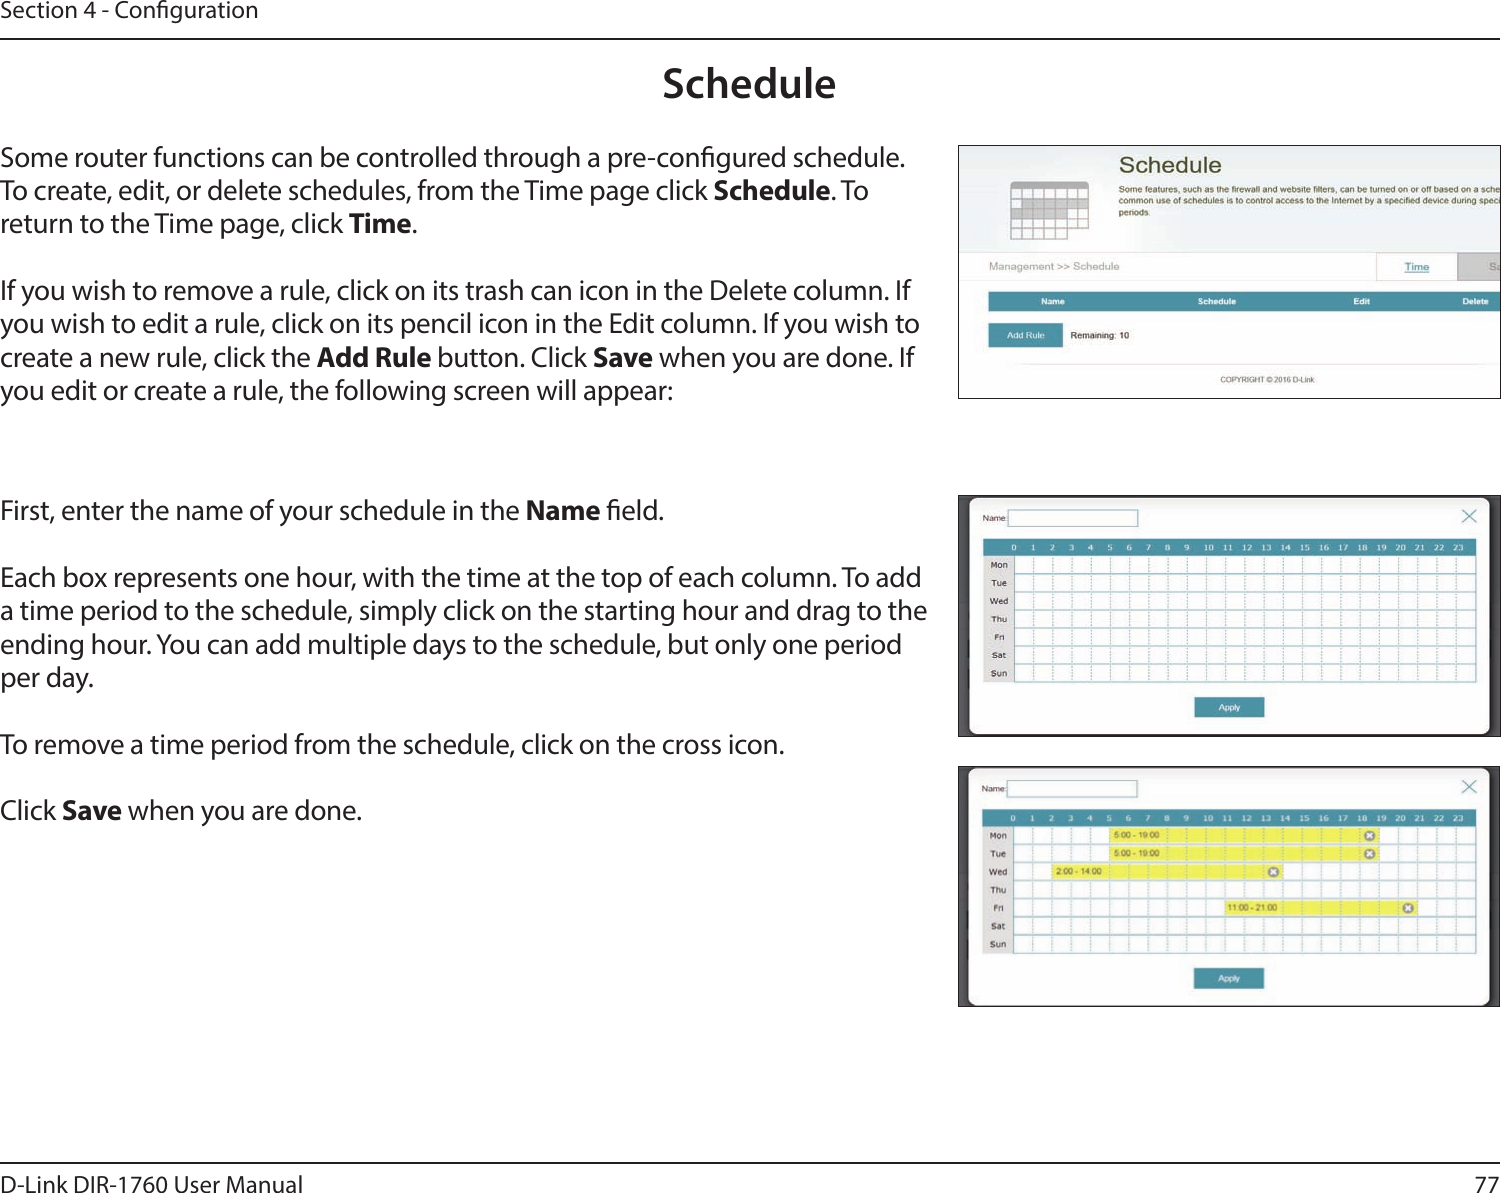 77D-Link DIR-1760 User ManualSection 4 - CongurationScheduleSome router functions can be controlled through a pre-congured schedule. To create, edit, or delete schedules, from the Time page click Schedule. To return to the Time page, click Time. If you wish to remove a rule, click on its trash can icon in the Delete column. If you wish to edit a rule, click on its pencil icon in the Edit column. If you wish to create a new rule, click the Add Rule button. Click Save when you are done. If you edit or create a rule, the following screen will appear:First, enter the name of your schedule in the Name eld.Each box represents one hour, with the time at the top of each column. To add a time period to the schedule, simply click on the starting hour and drag to the ending hour. You can add multiple days to the schedule, but only one period per day.To remove a time period from the schedule, click on the cross icon.Click Save when you are done.